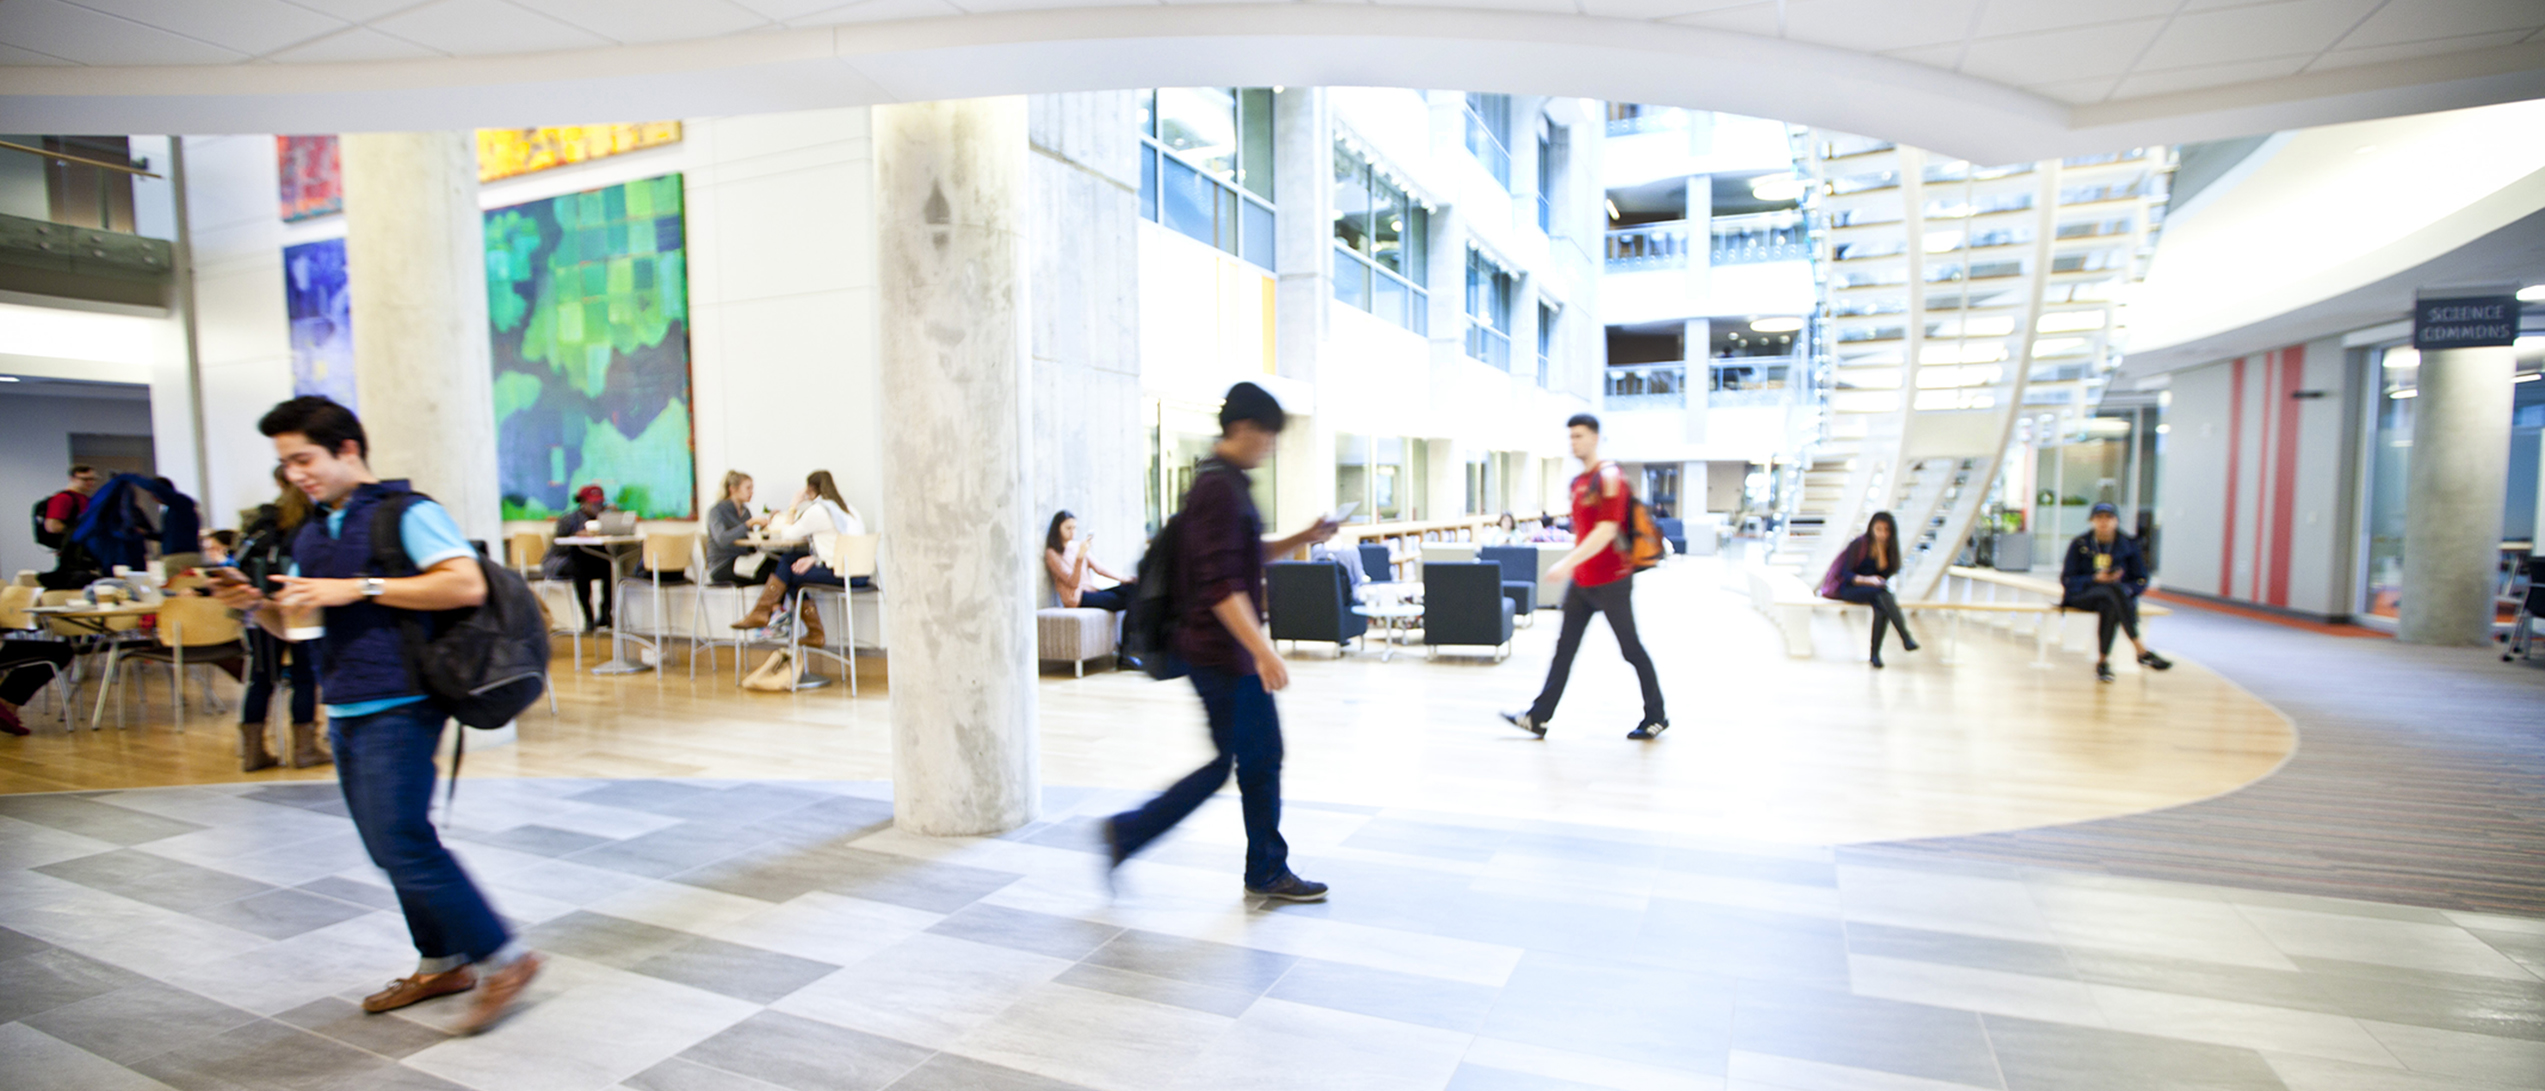 Students walking through the Student Center